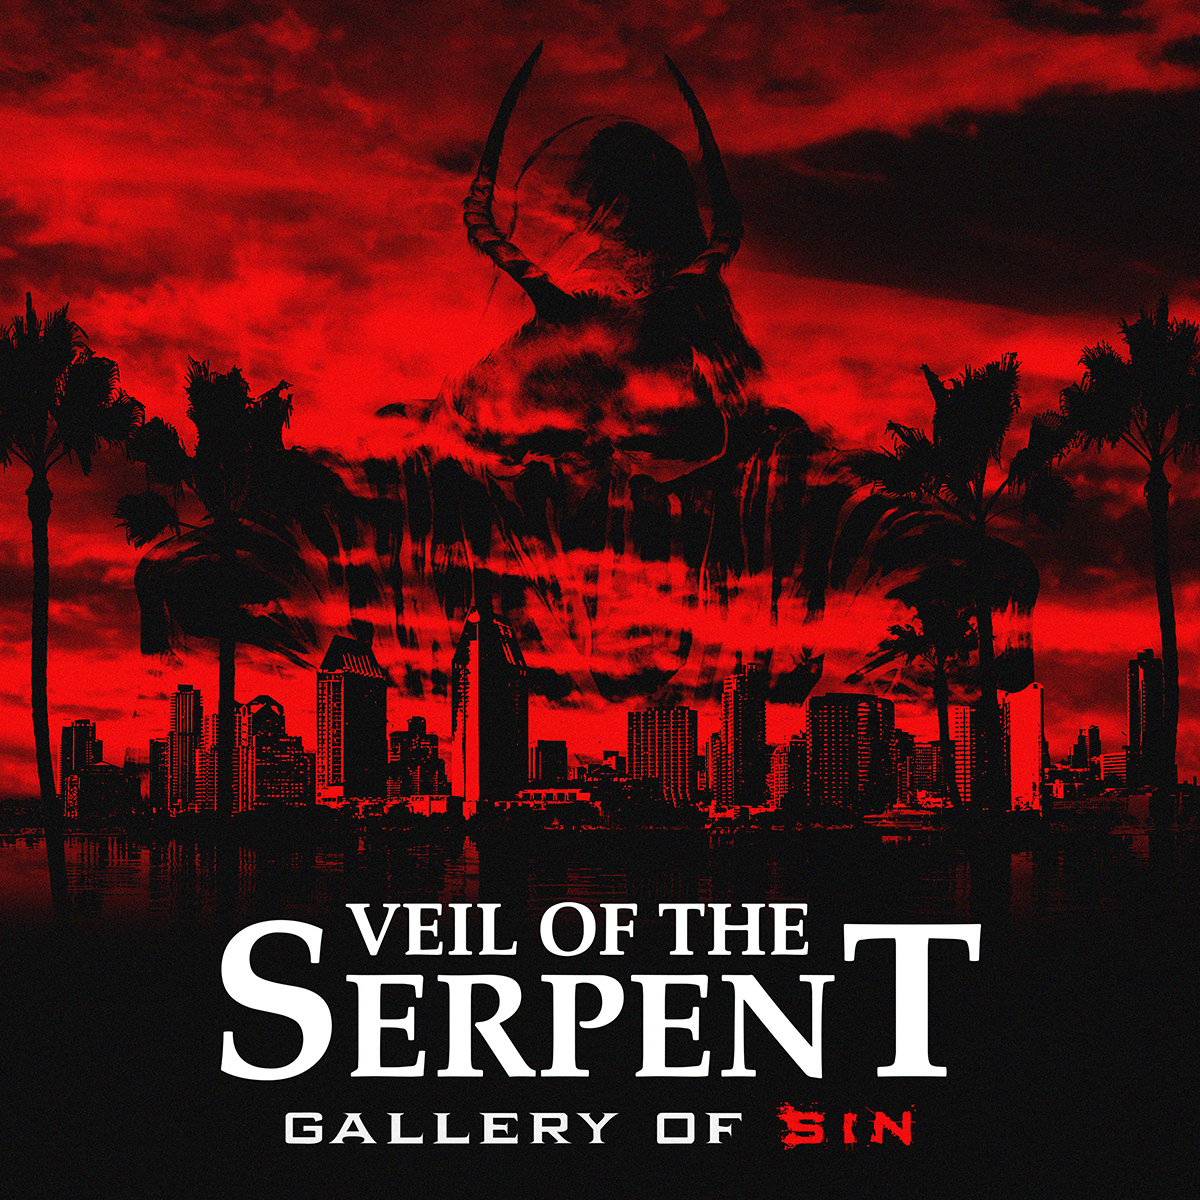 Gallery of Sin - Veil of the Serpent